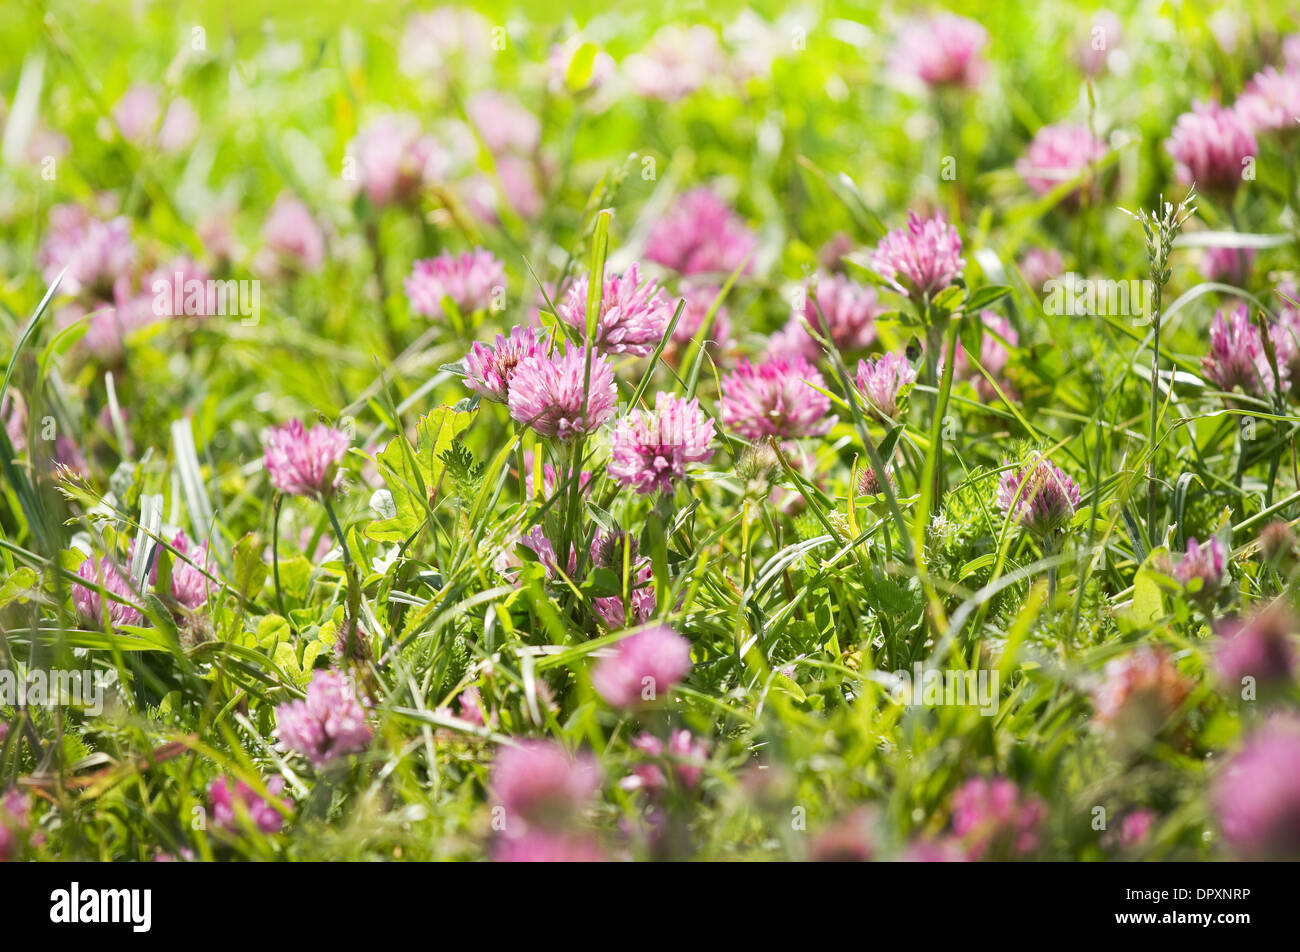 Red clover or Trifolium pratense flowers growing on field in summer Stock Photo